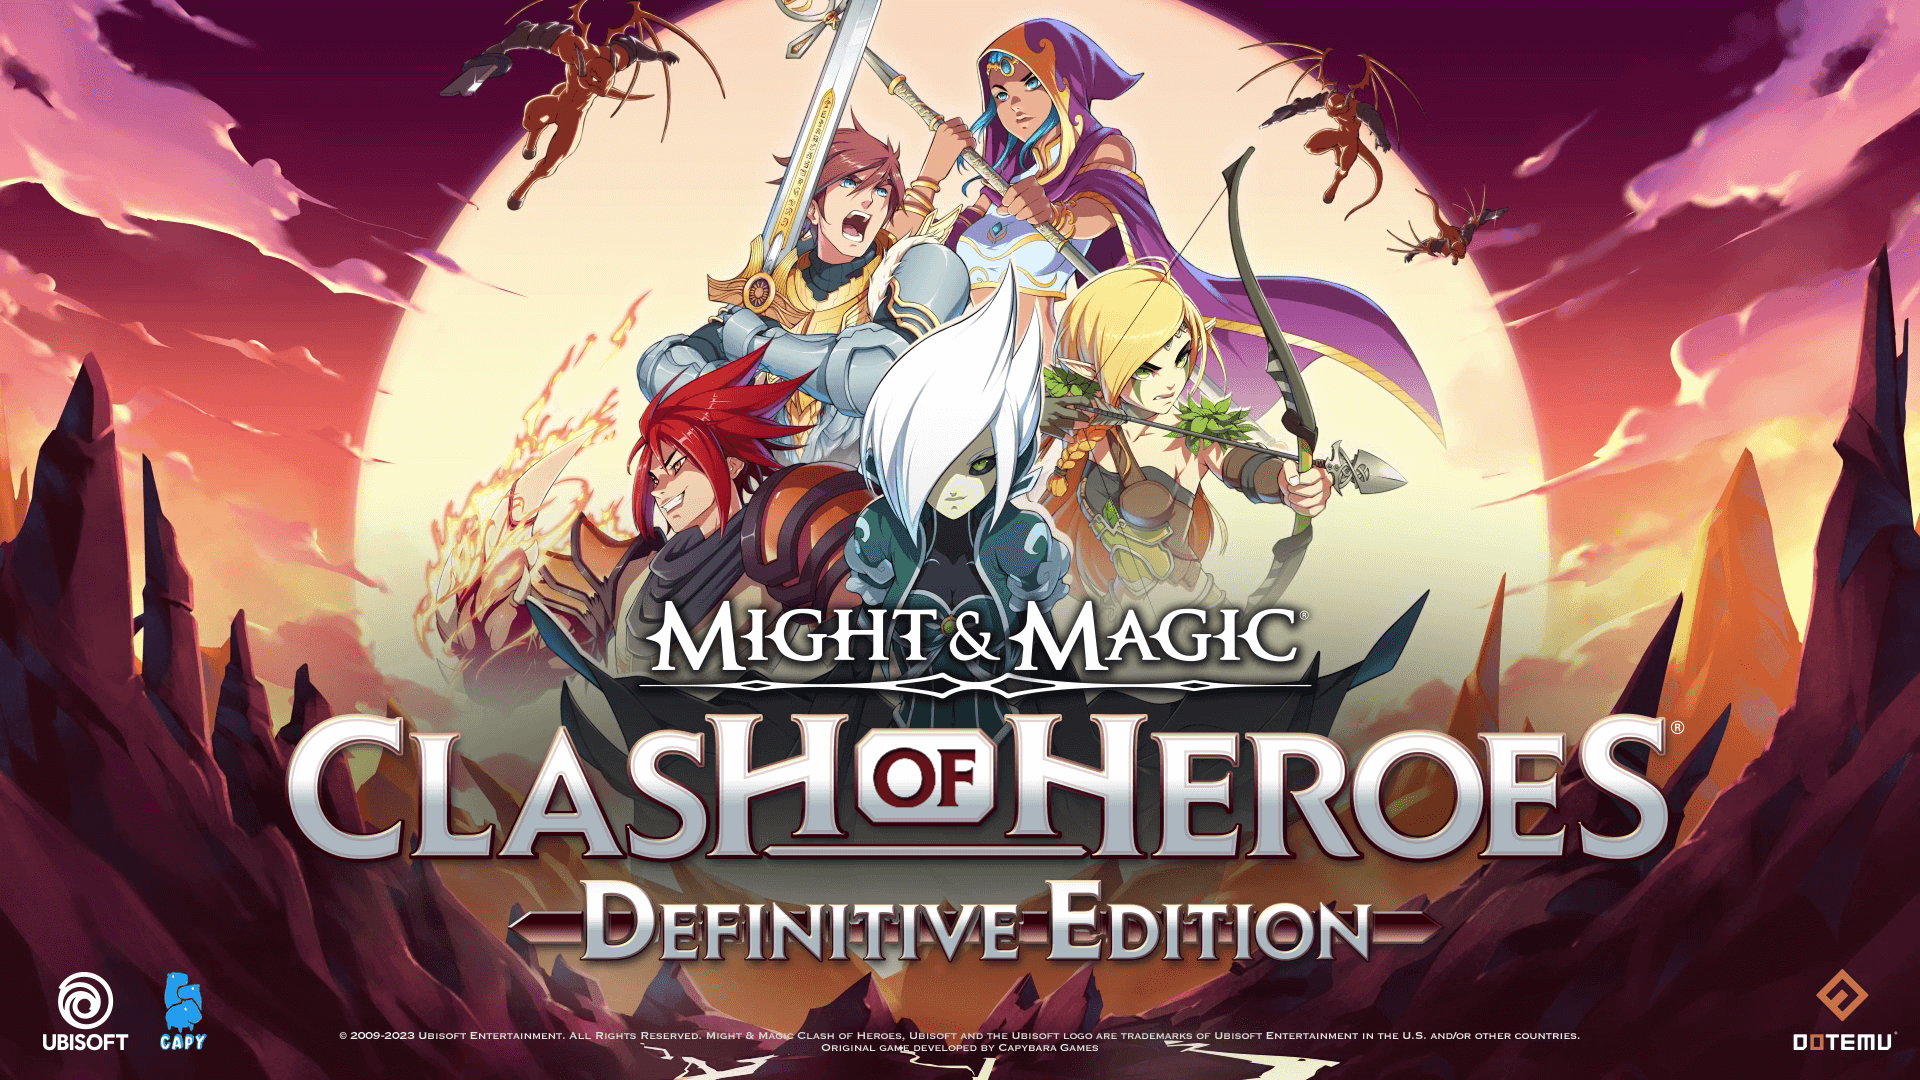 Might & Magic: Clash of Heroes - Definitive Edition cover